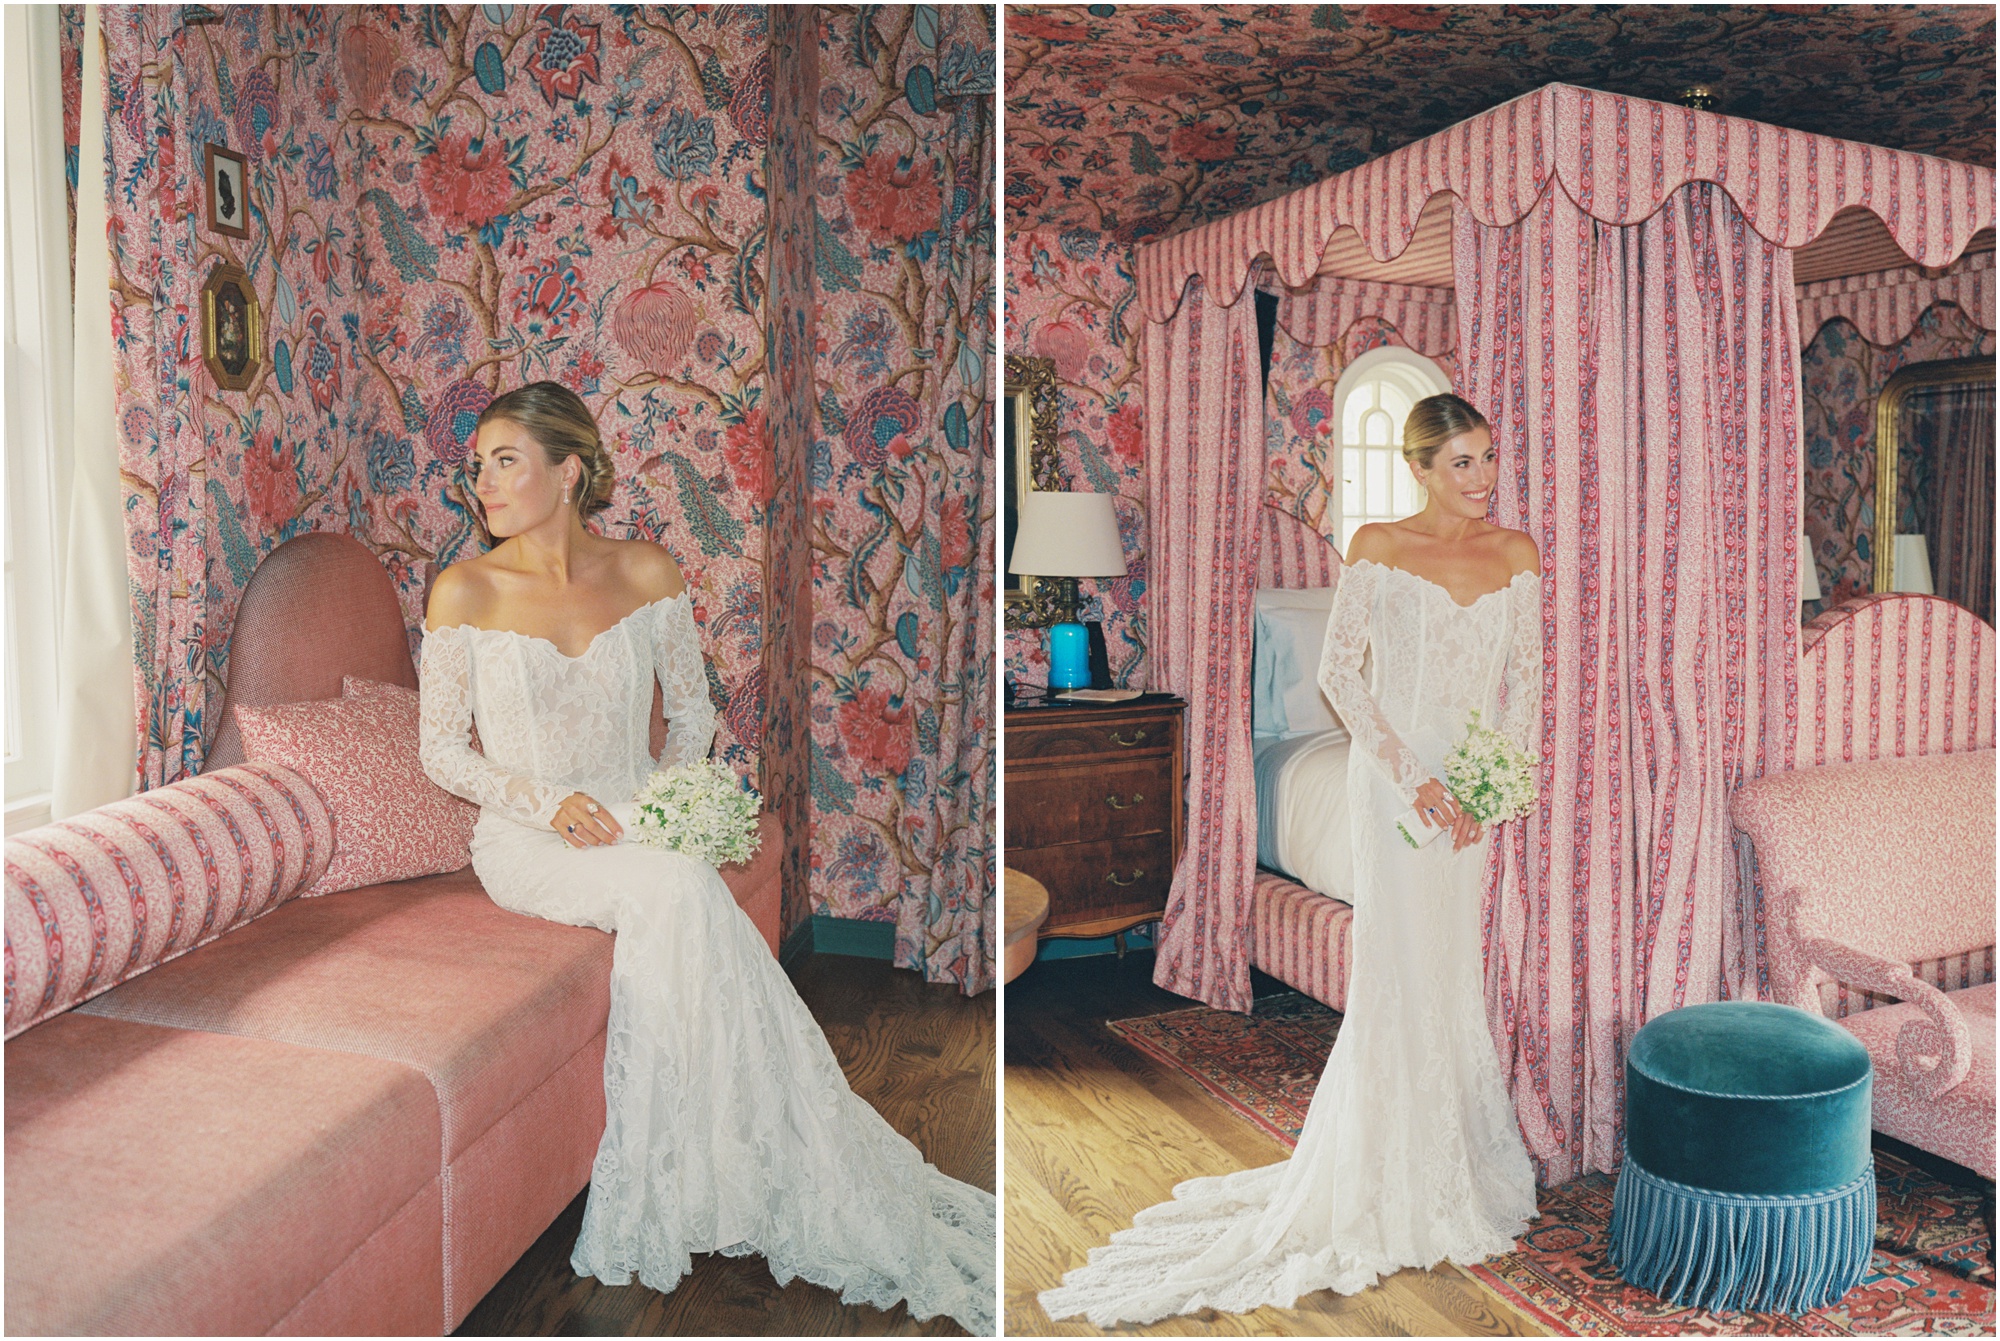 commodore perry estate Pink Room in Austin, Texas with bridal portraits on 120mm film